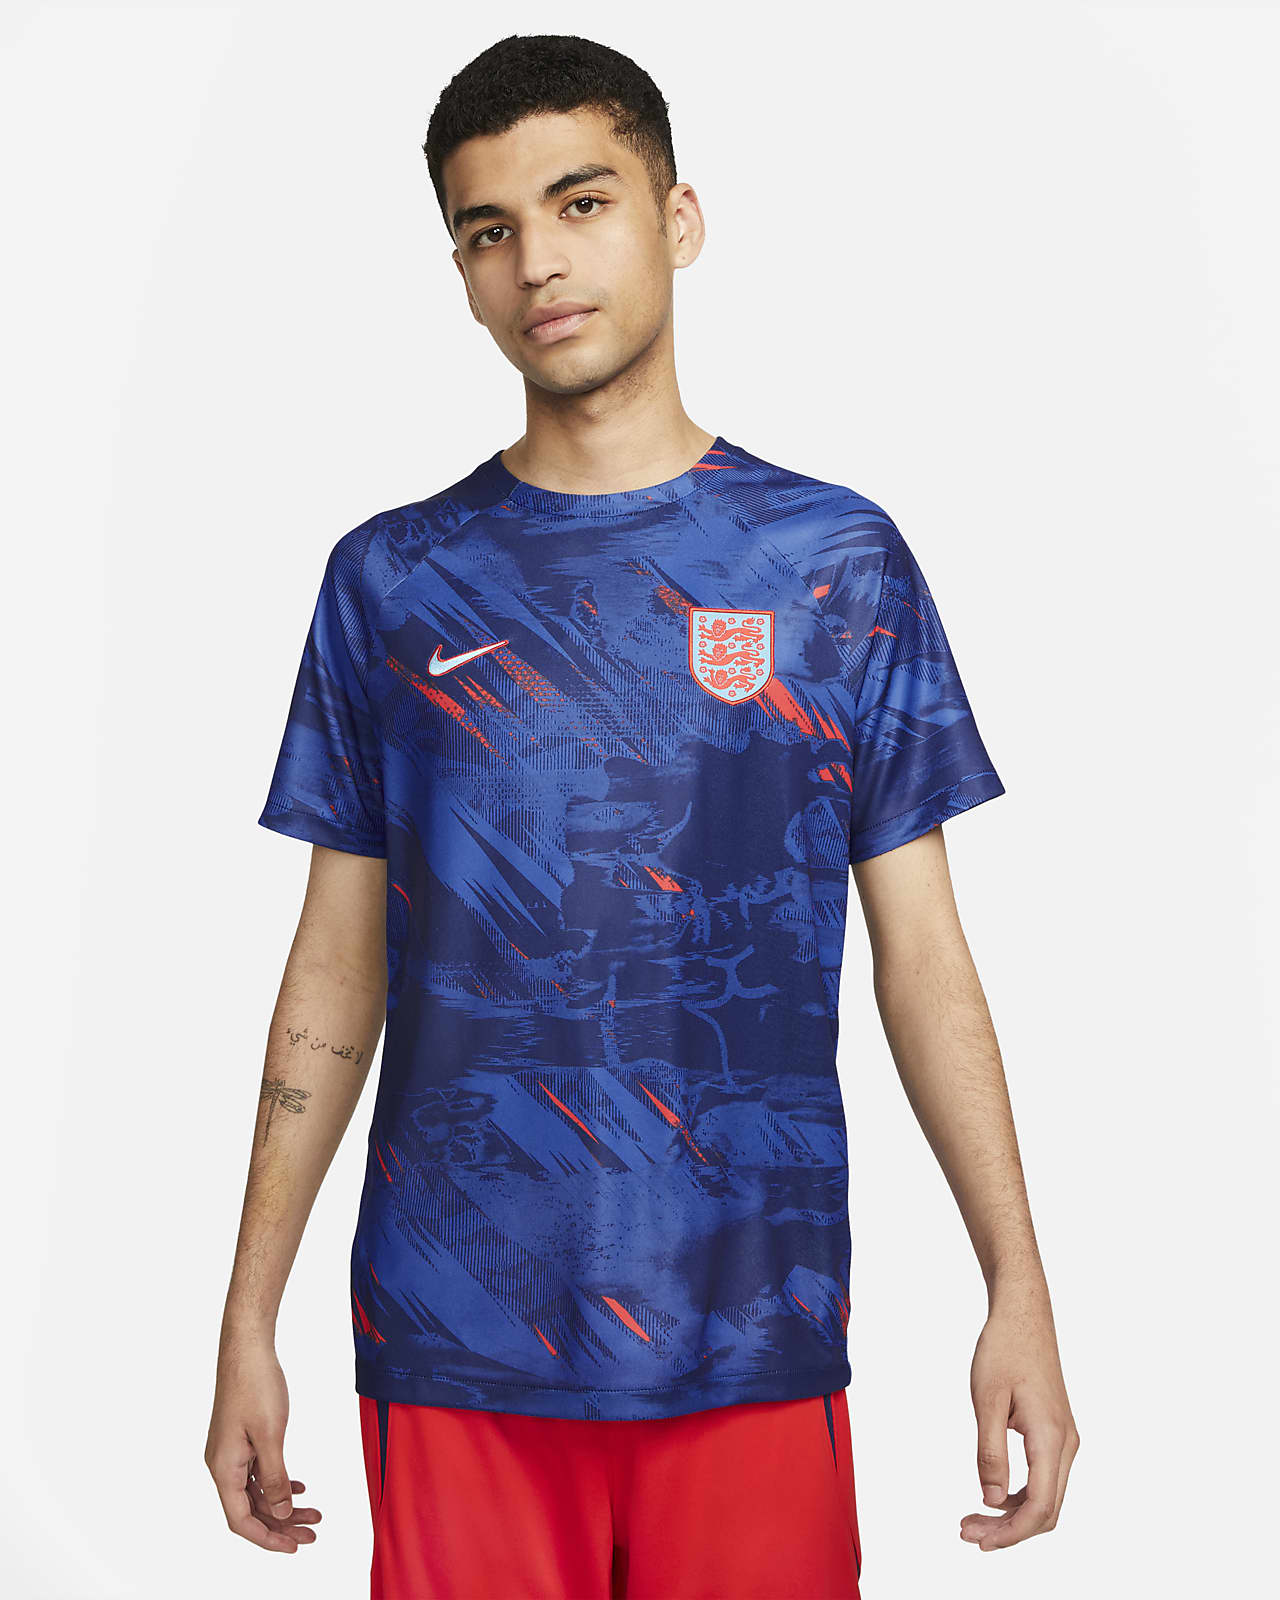 Adidas Japan Pre-Match Jersey Red / S